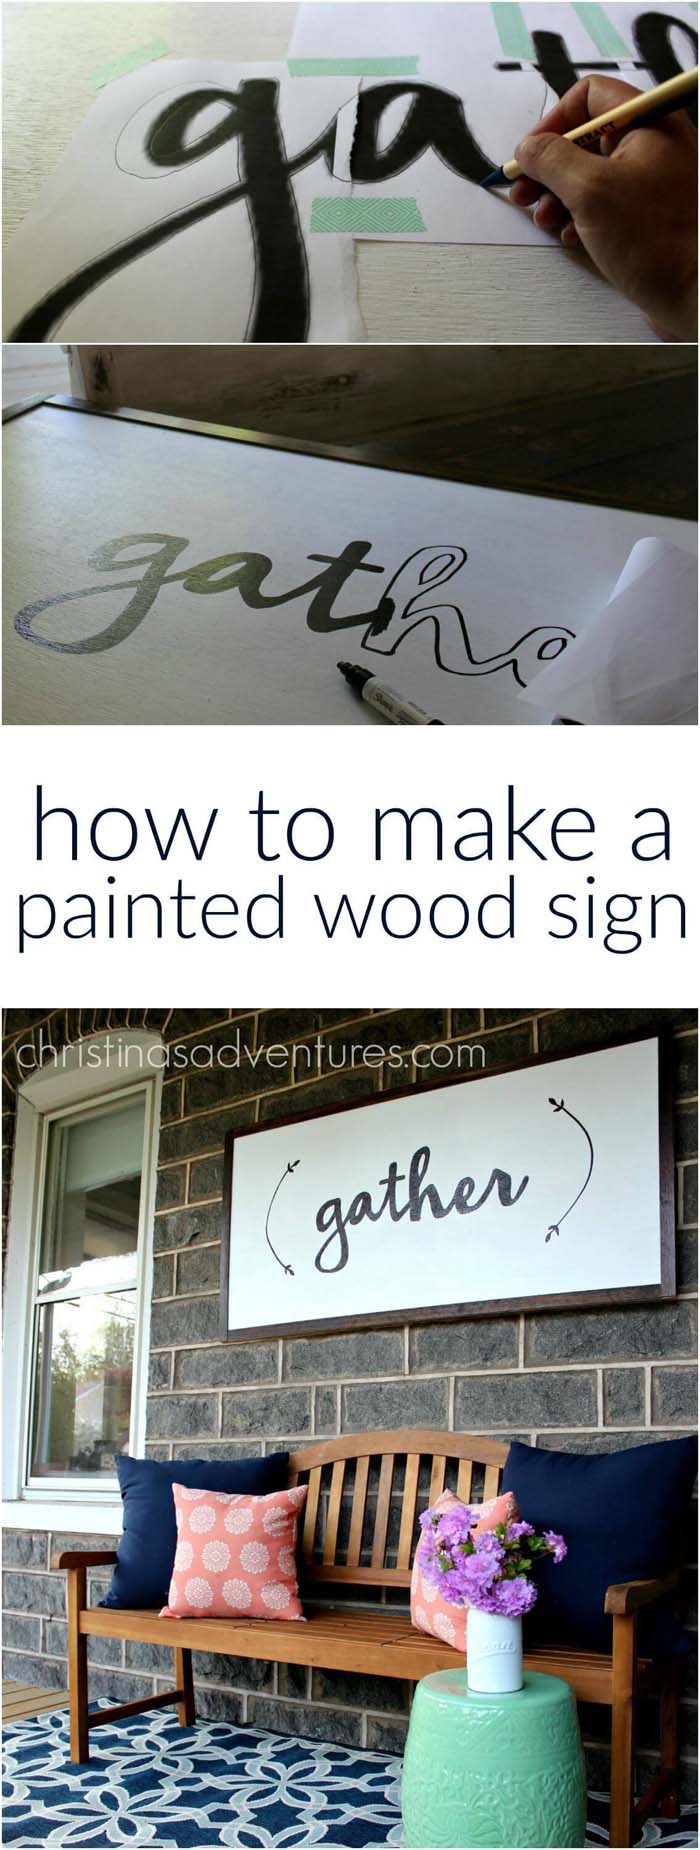 Stencil Your Own Wooden Signs #diy #porch #patio #projects #colorful #decorhomeideas